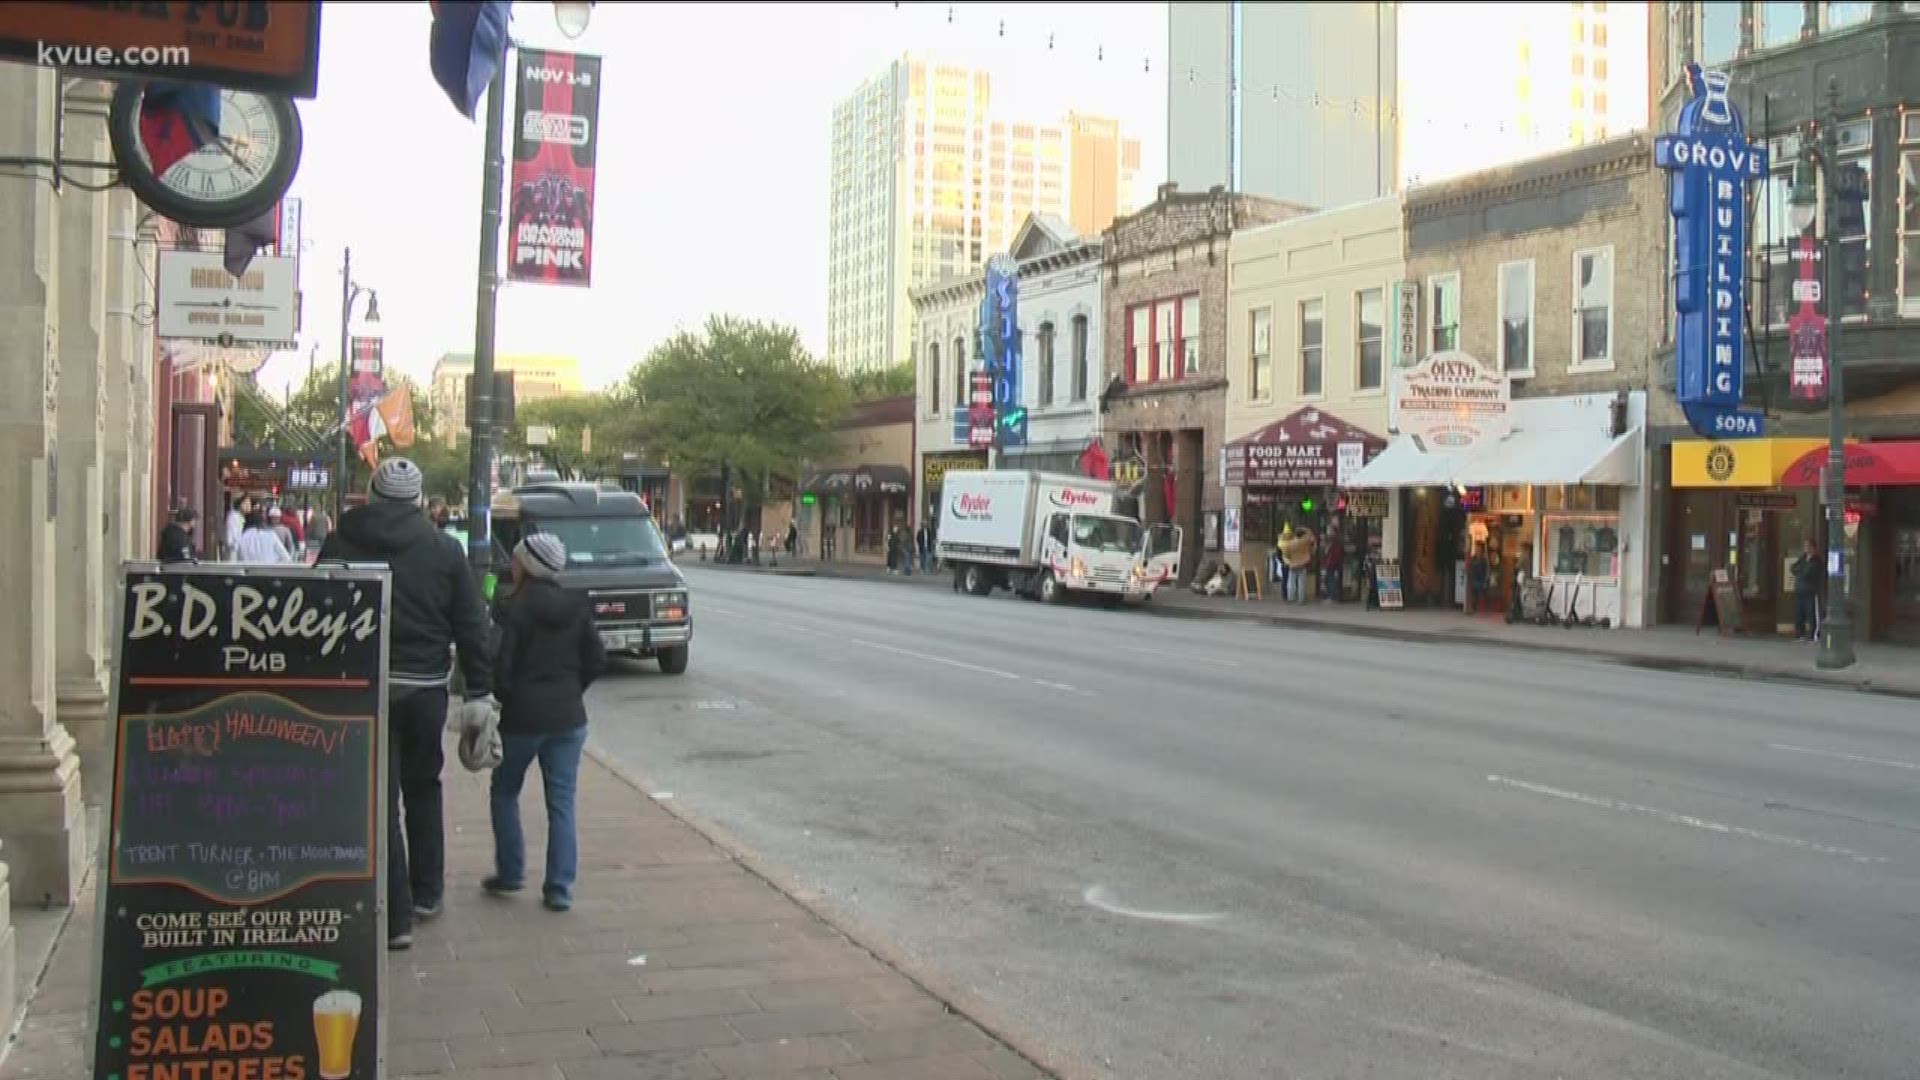 The state is telling bar owners to keep their customers safe.